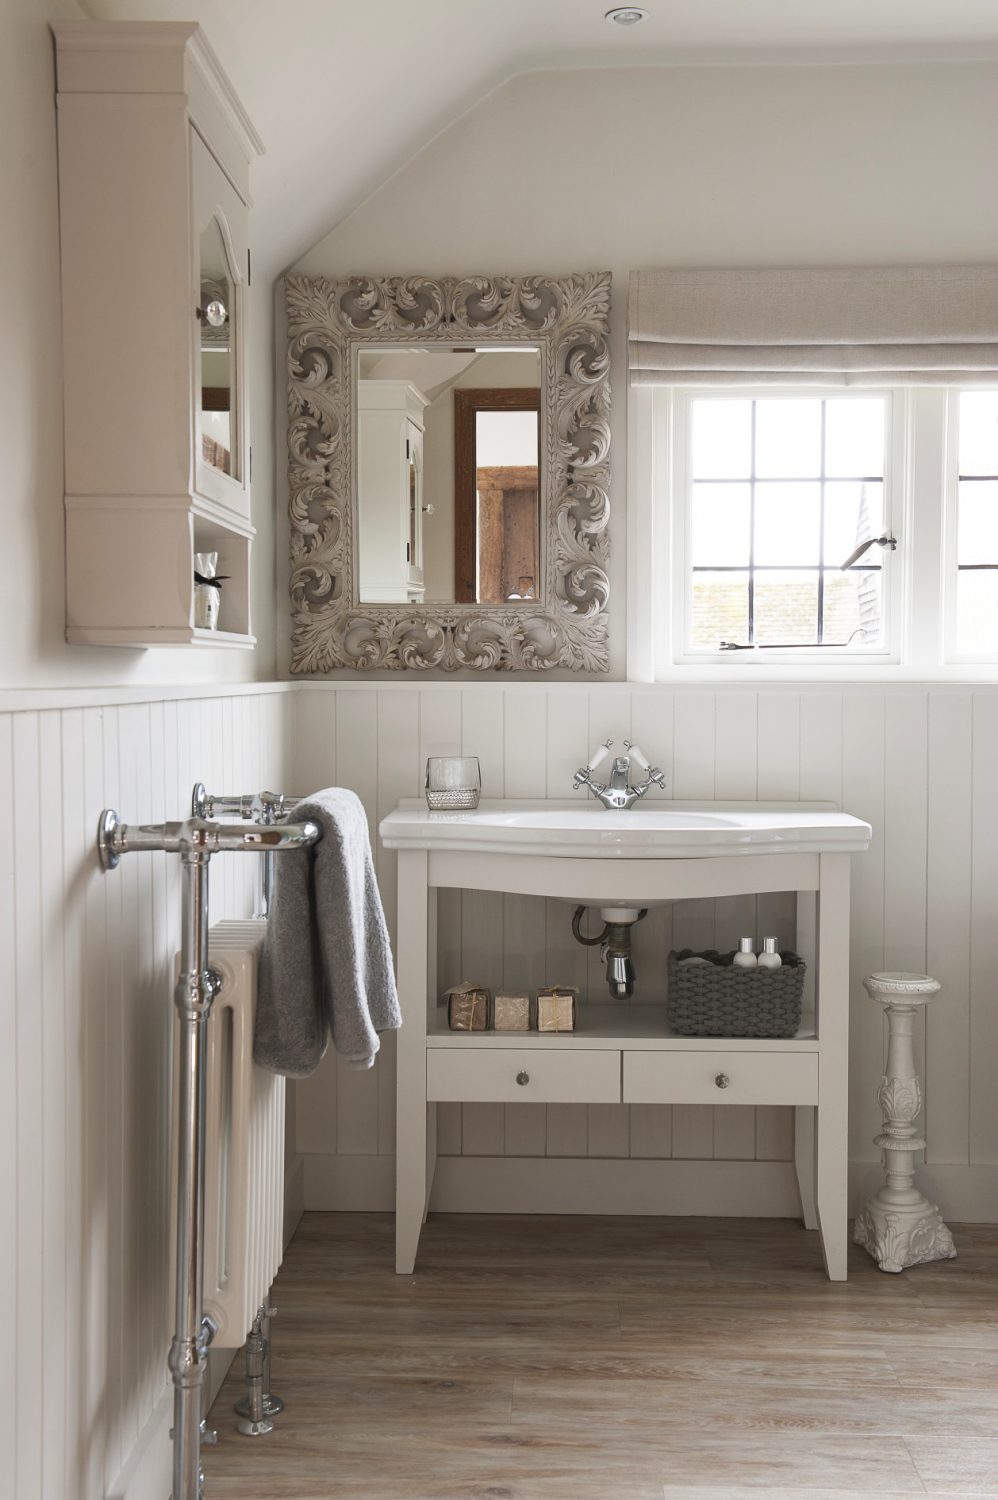 An ornate mirror is a feature in the classic, welcoming bathroom, where tongue-and-groove panelling adds a country cottage feel alongside the painted wood sink unit